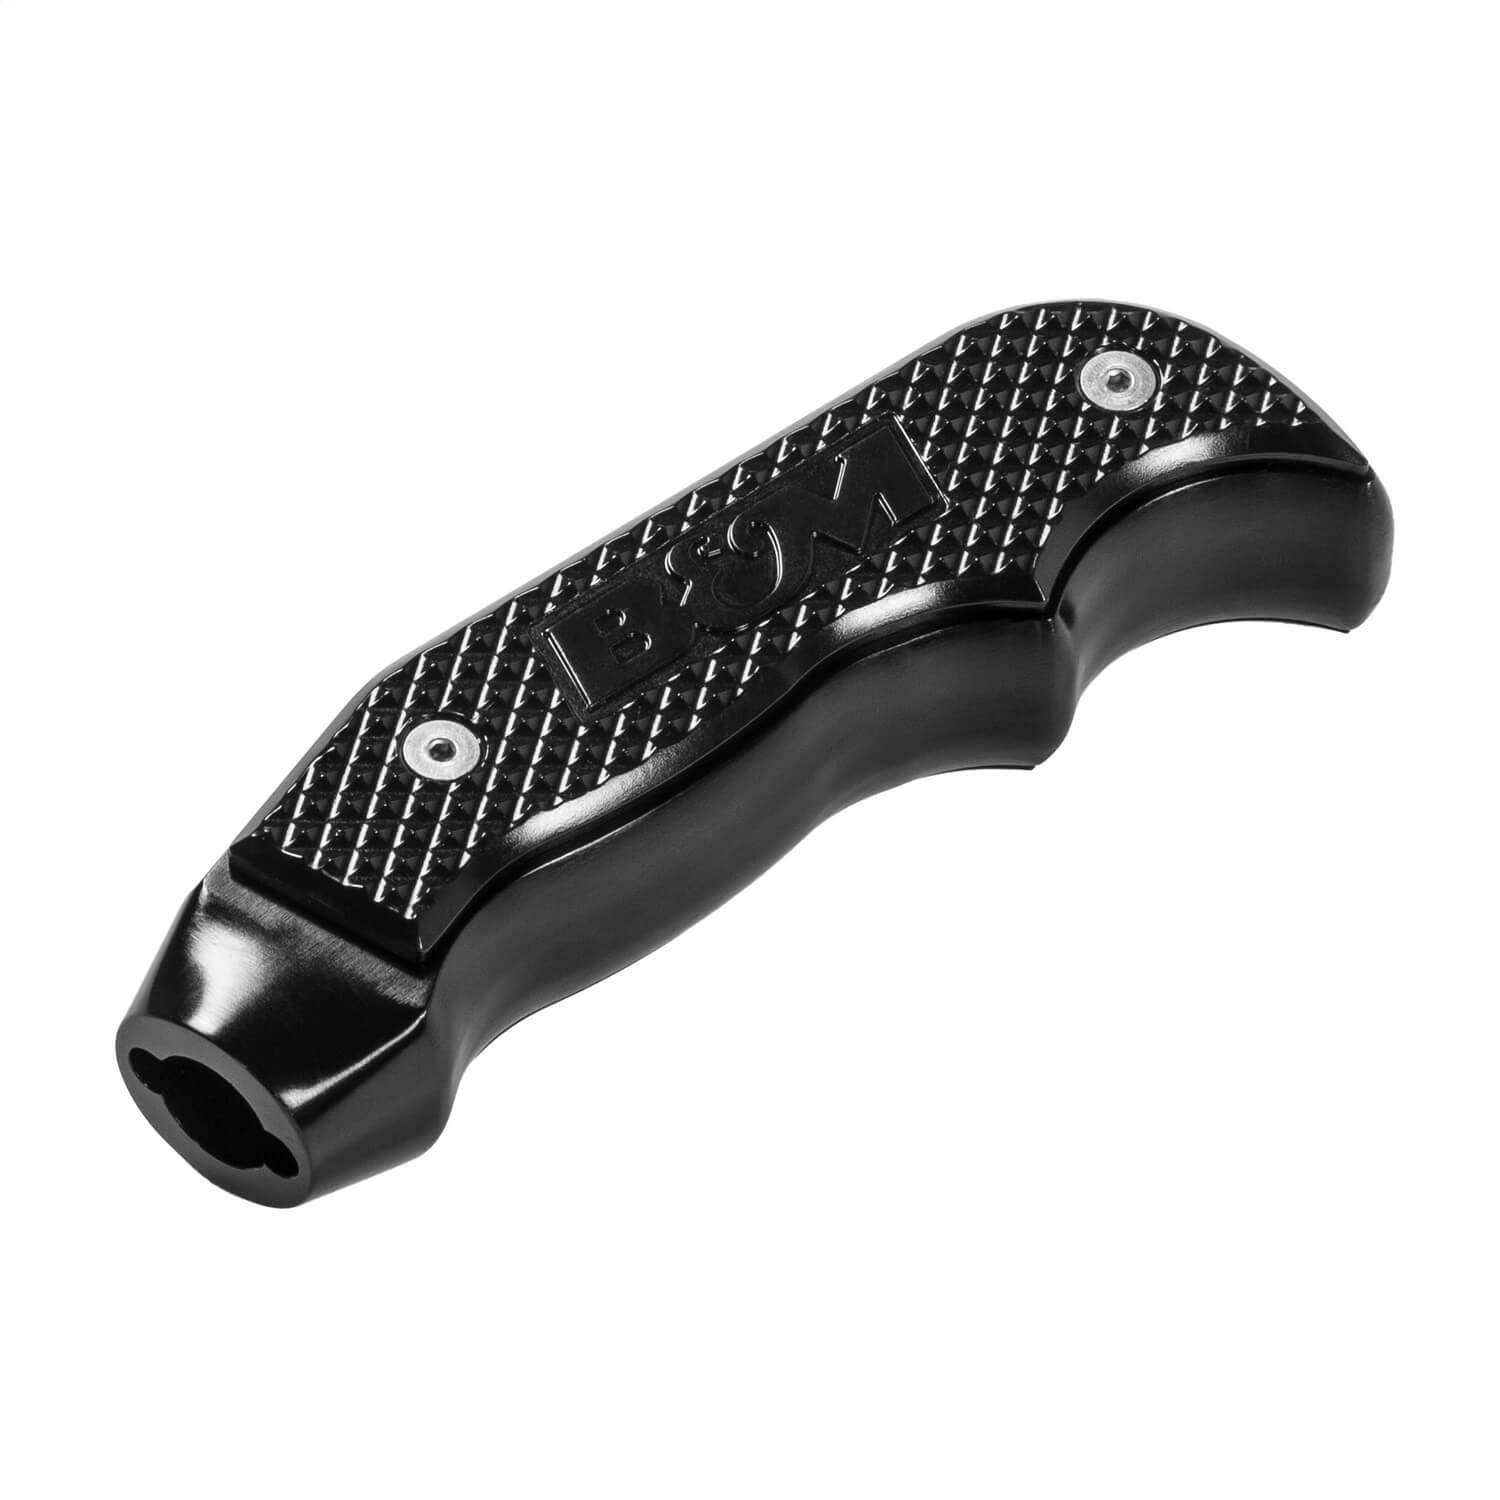 XDR 81223 08-20 RZR/RS1, MAG. SHIFT HANDLE, BLACK